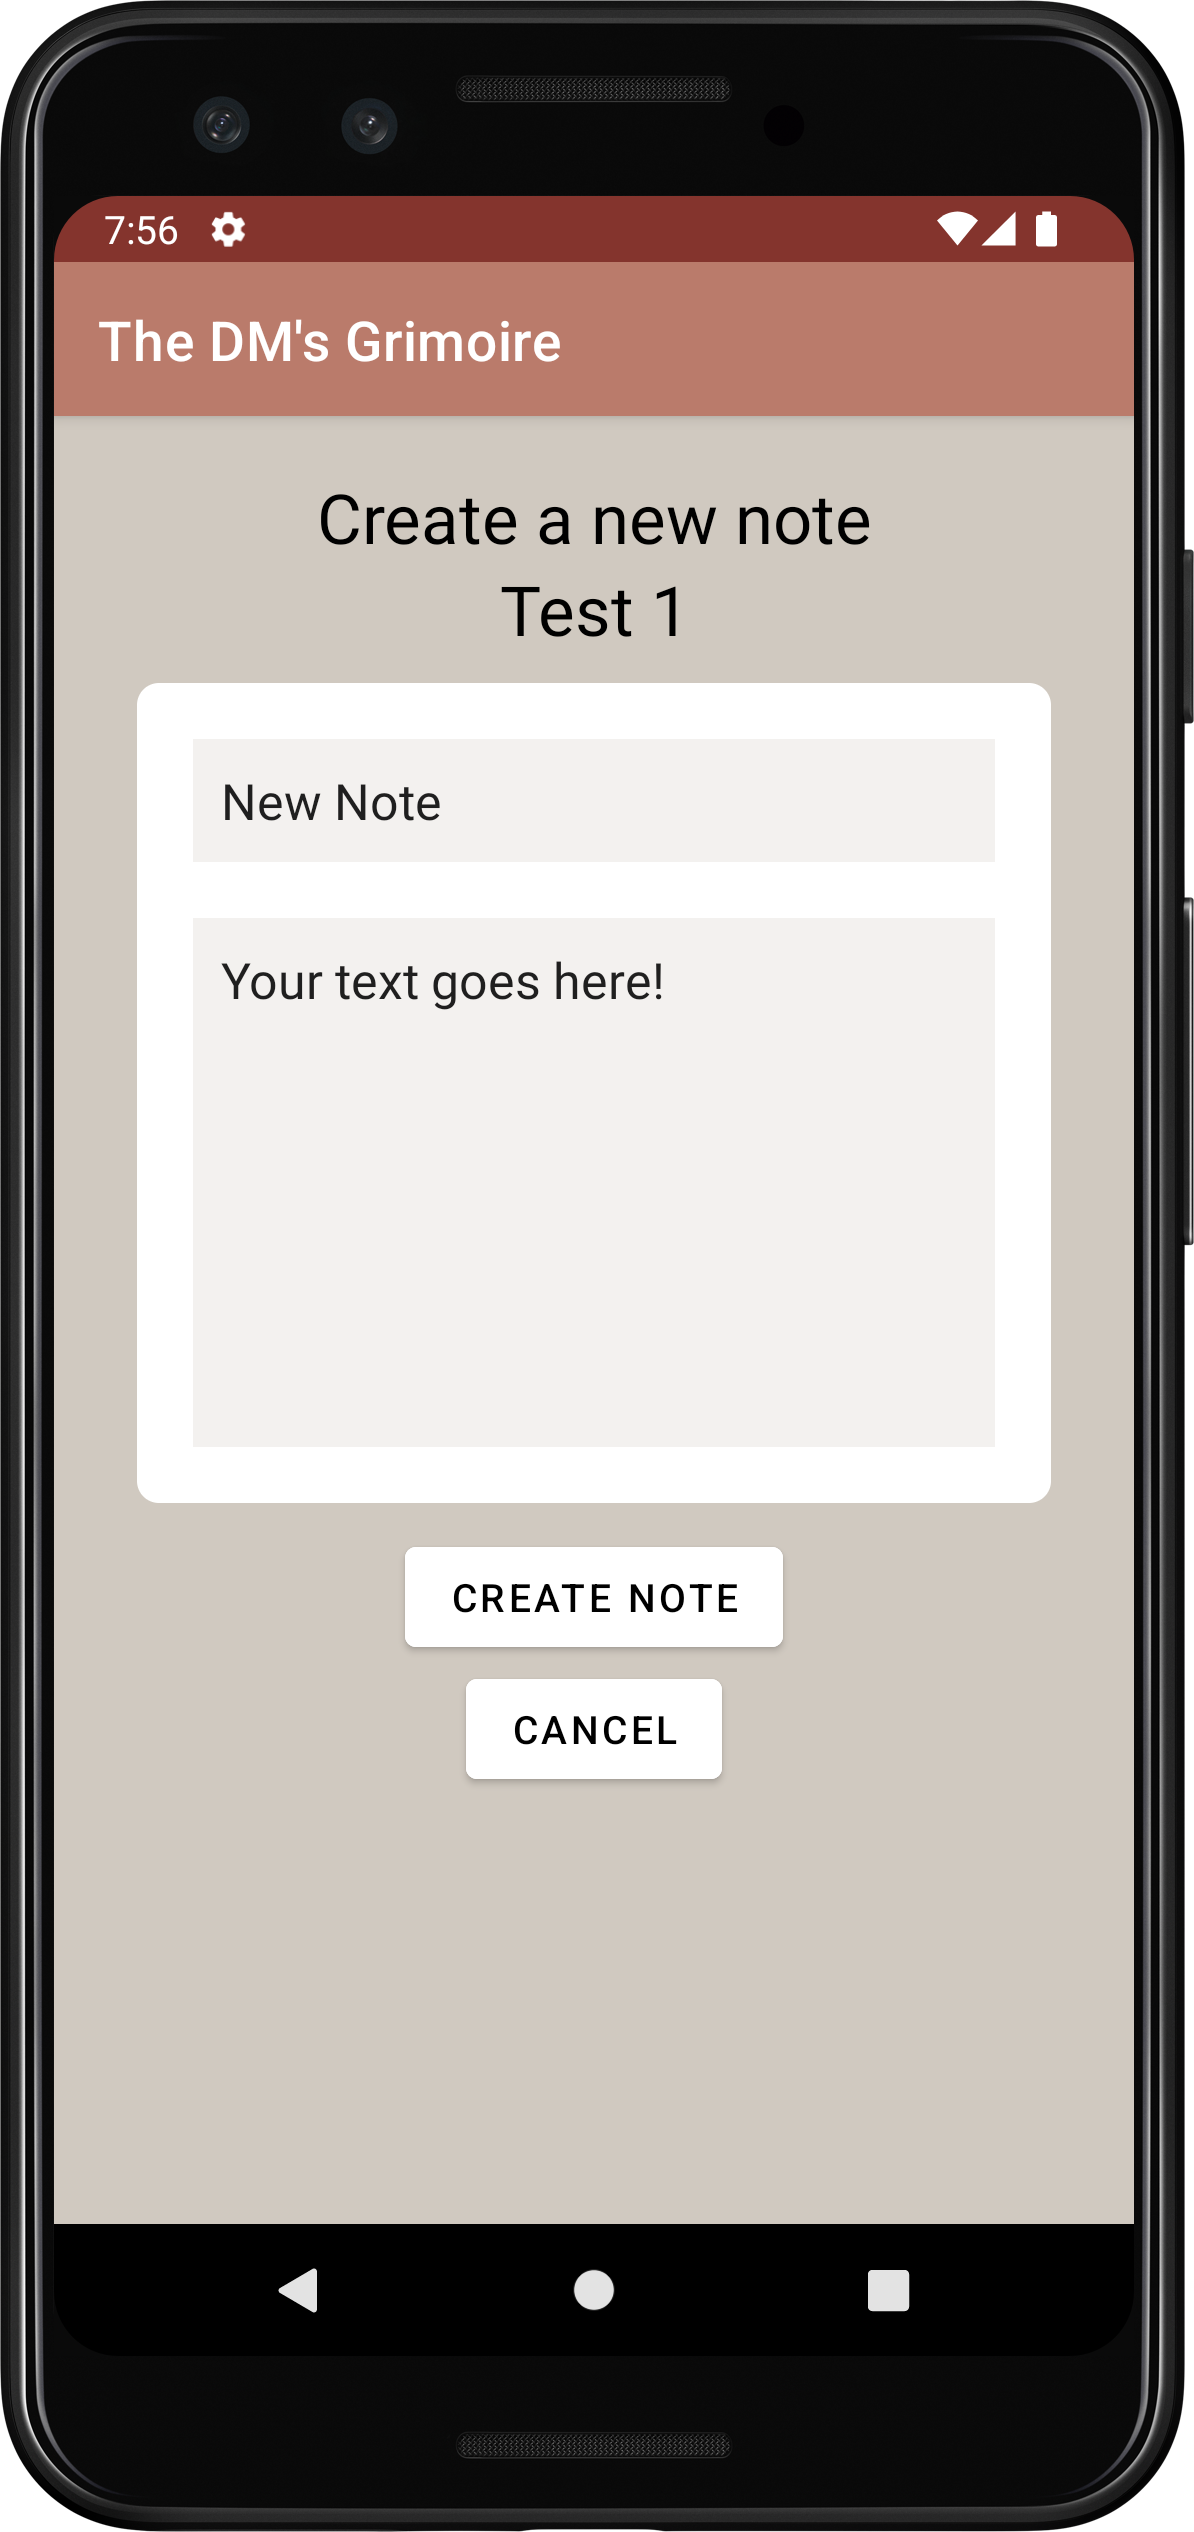 The note creation page. Here, a user enters the note's title and contents.